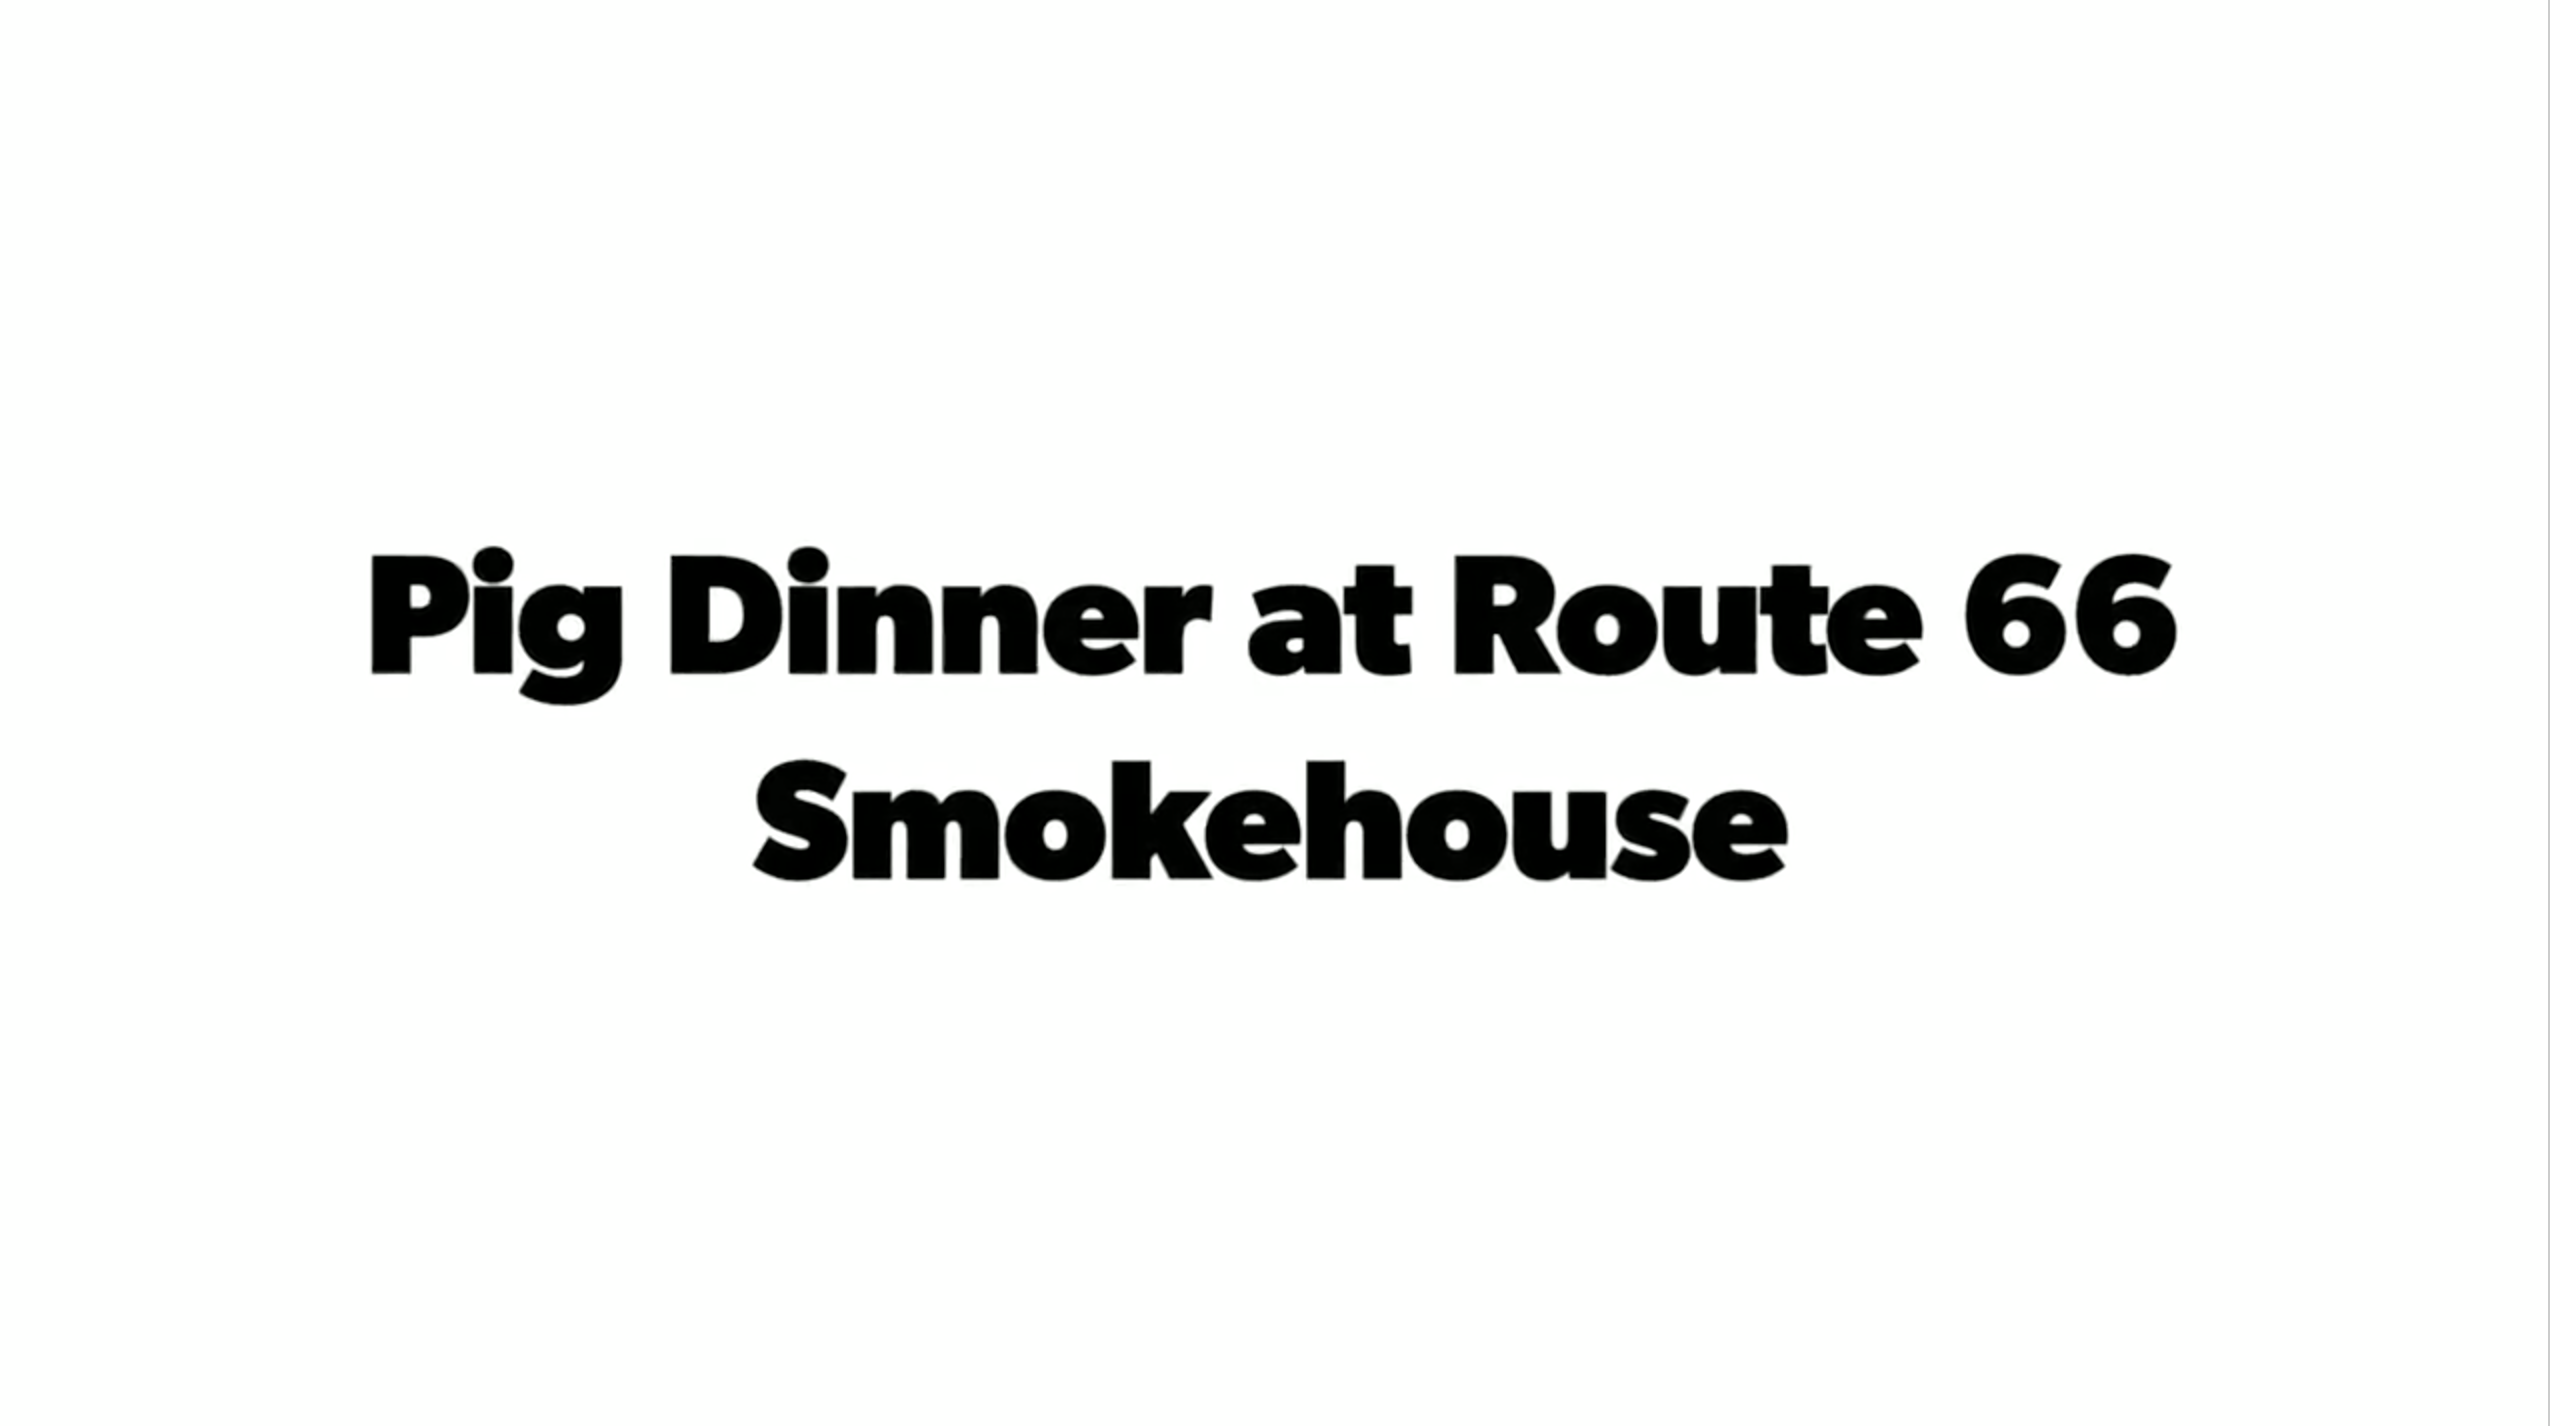 Pig Dinner at Route 66 Smokehouse